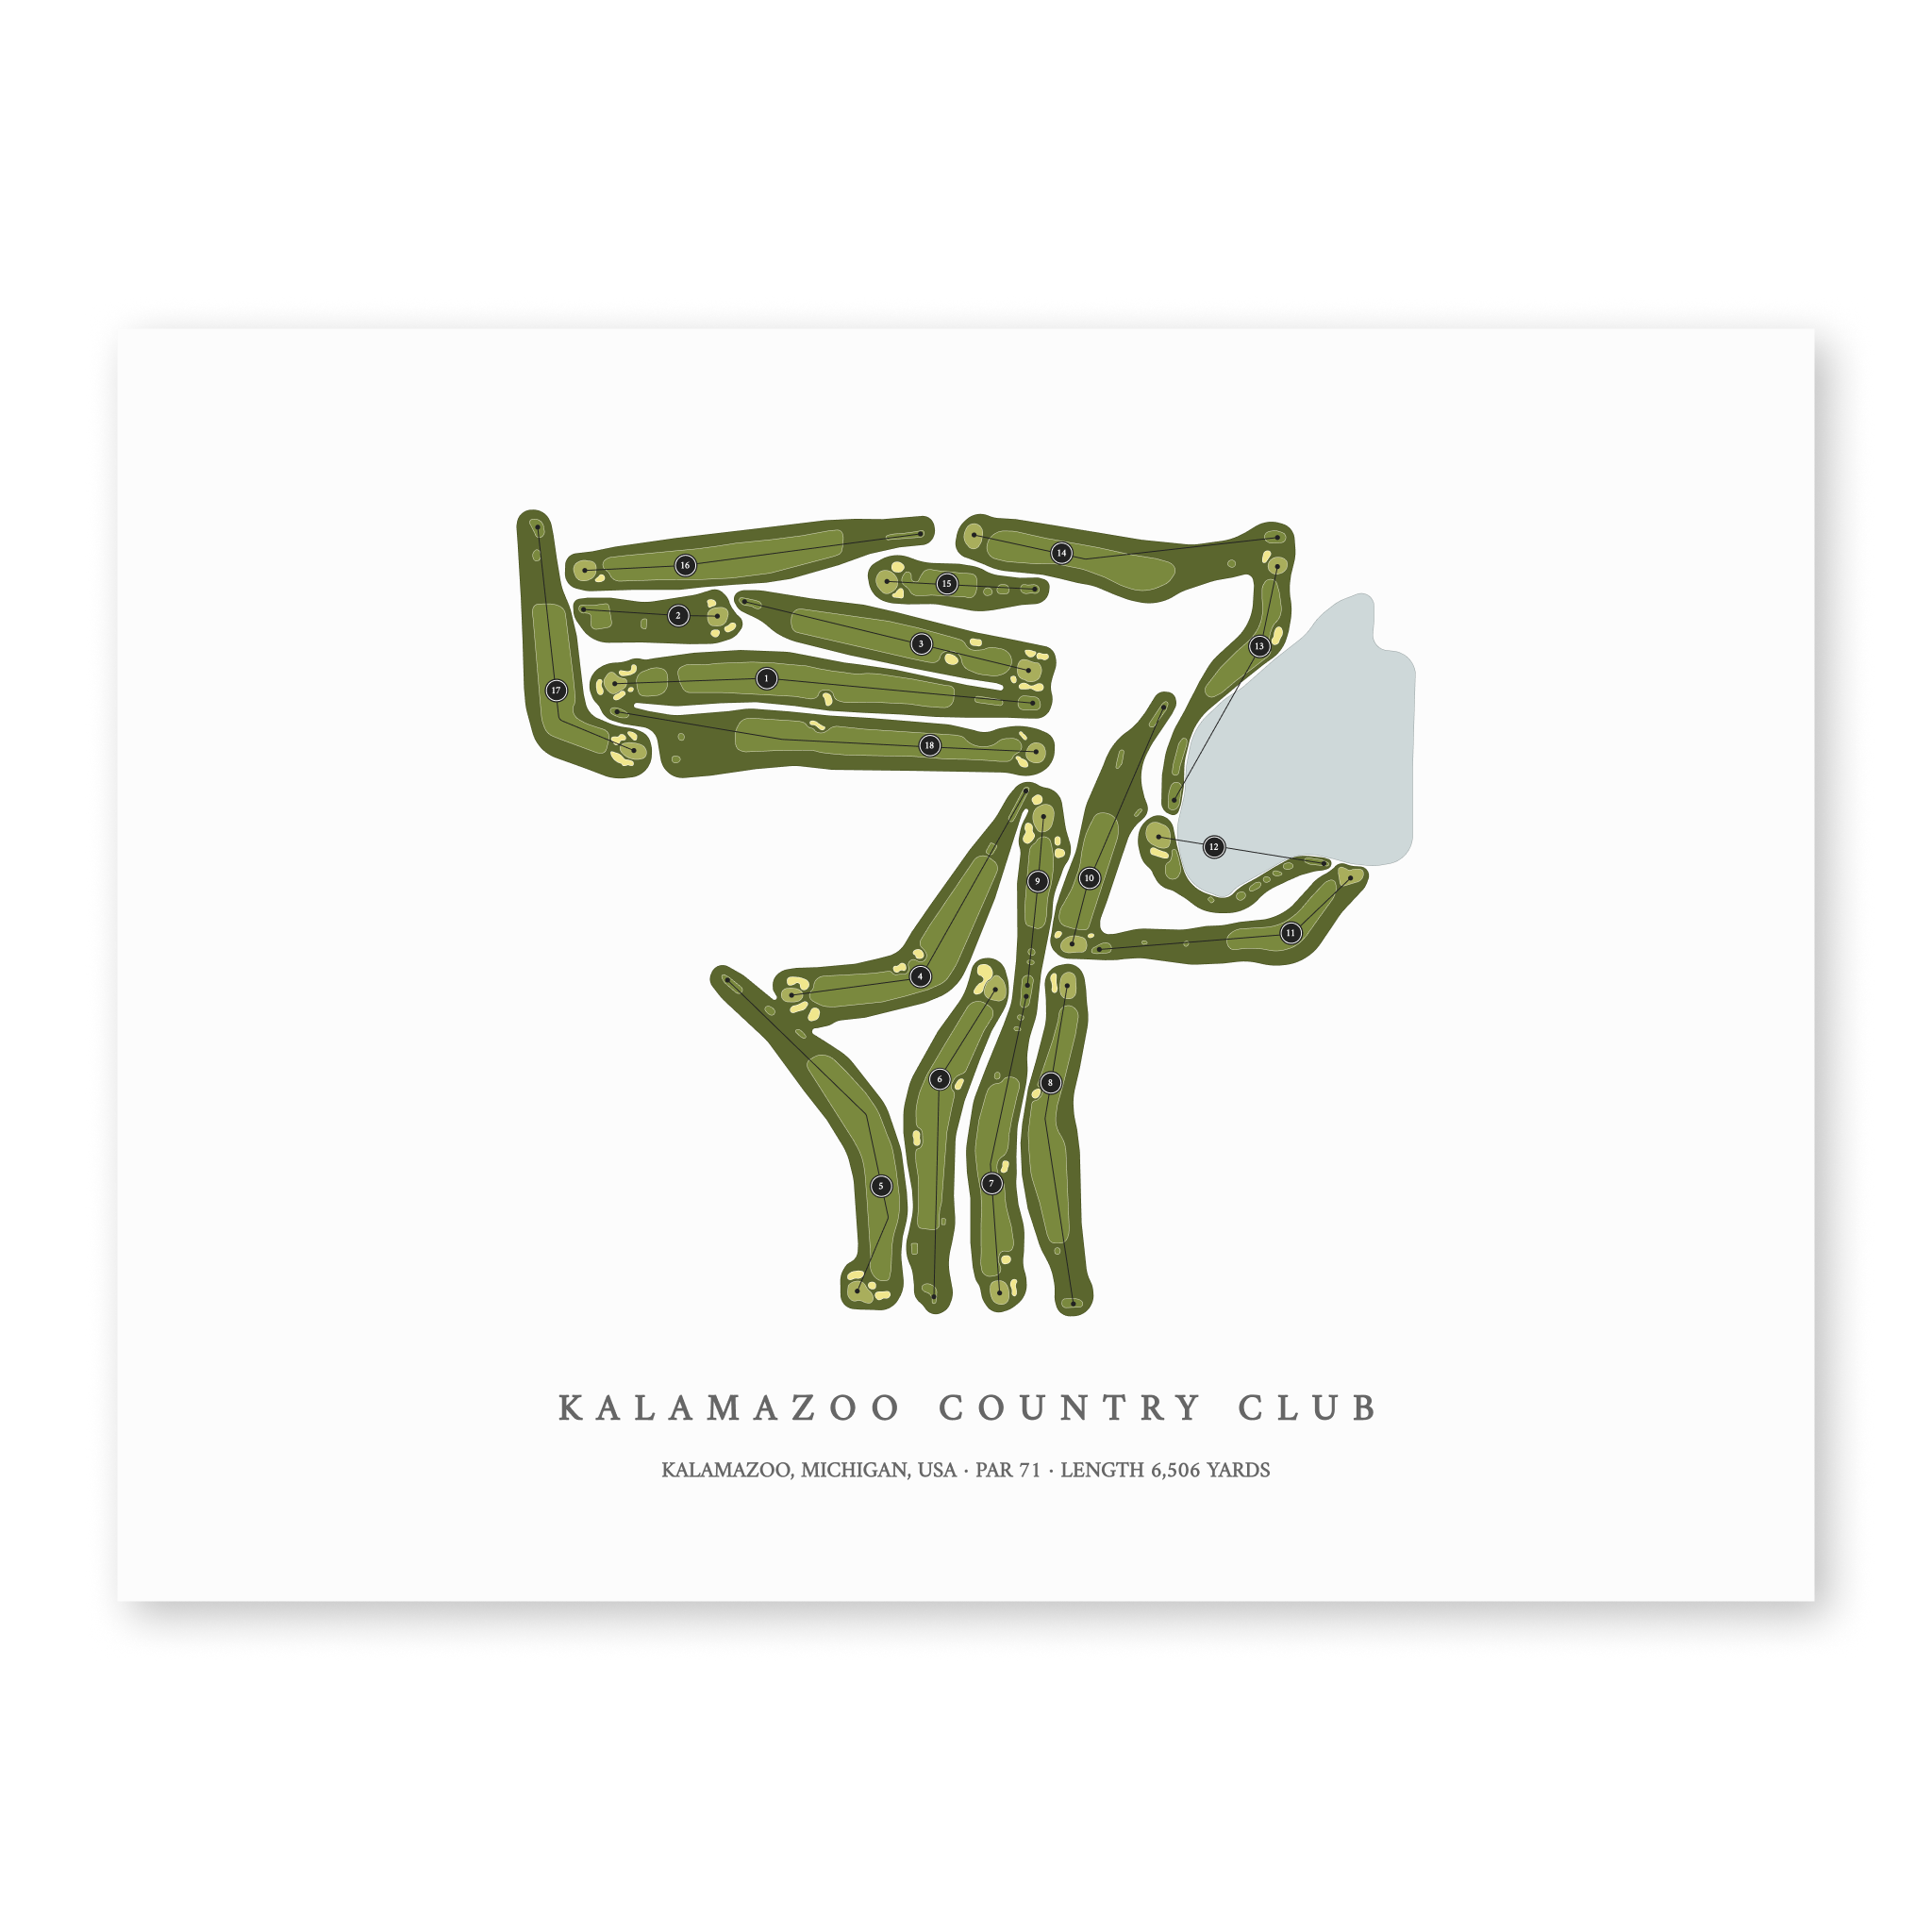 Kalamazoo Country Club| Golf Course Print | Unframed With Hole Numbers #hole numbers_yes